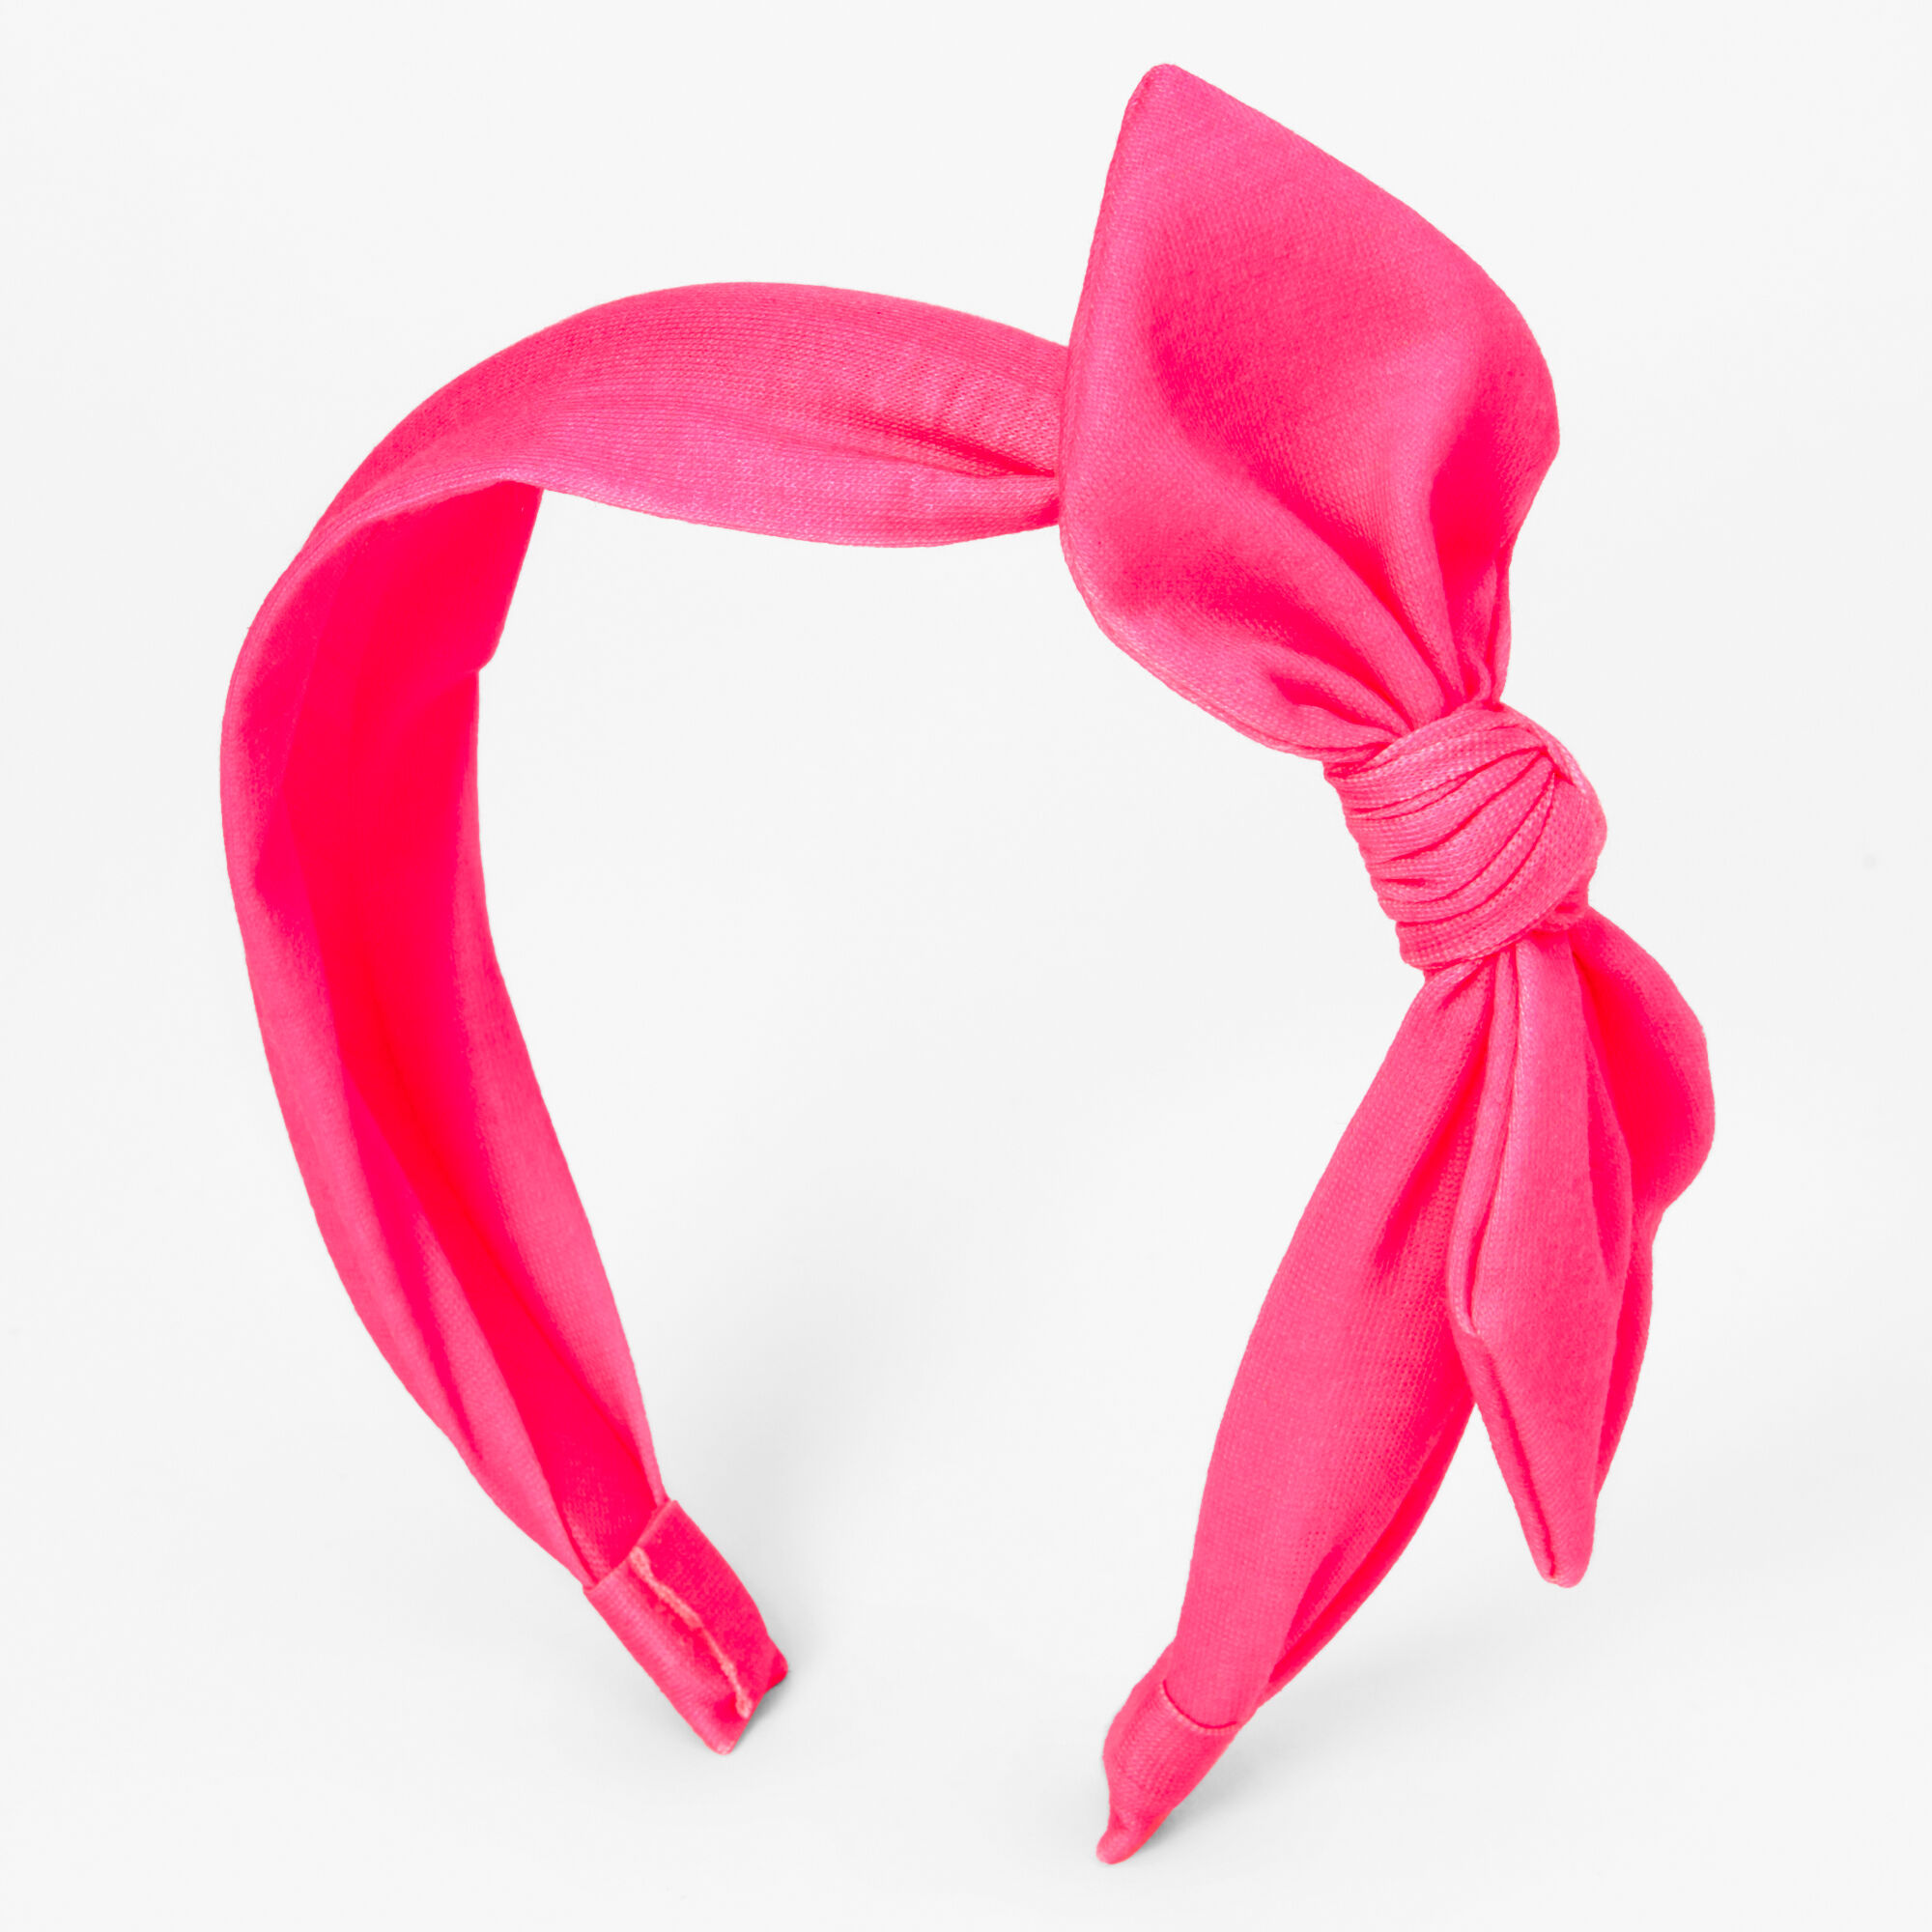 View Claires Club Hot Bow Headband Pink information